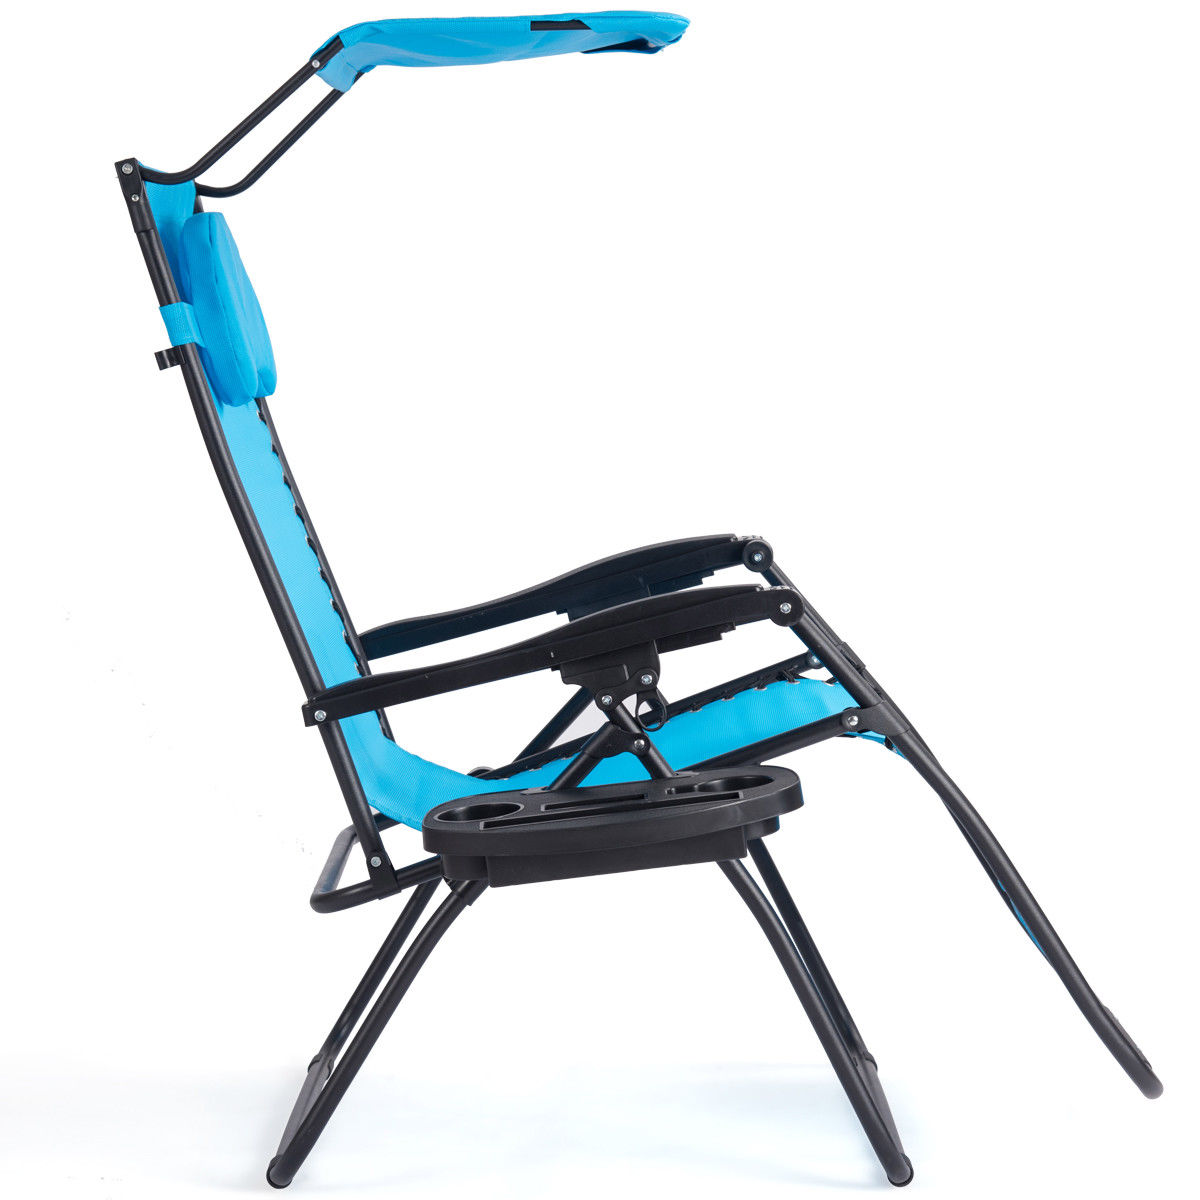 Gymax Folding Recliner Zero Gravity Lounge Chair W/ Shade Canopy Cup Holder Blue - image 5 of 10